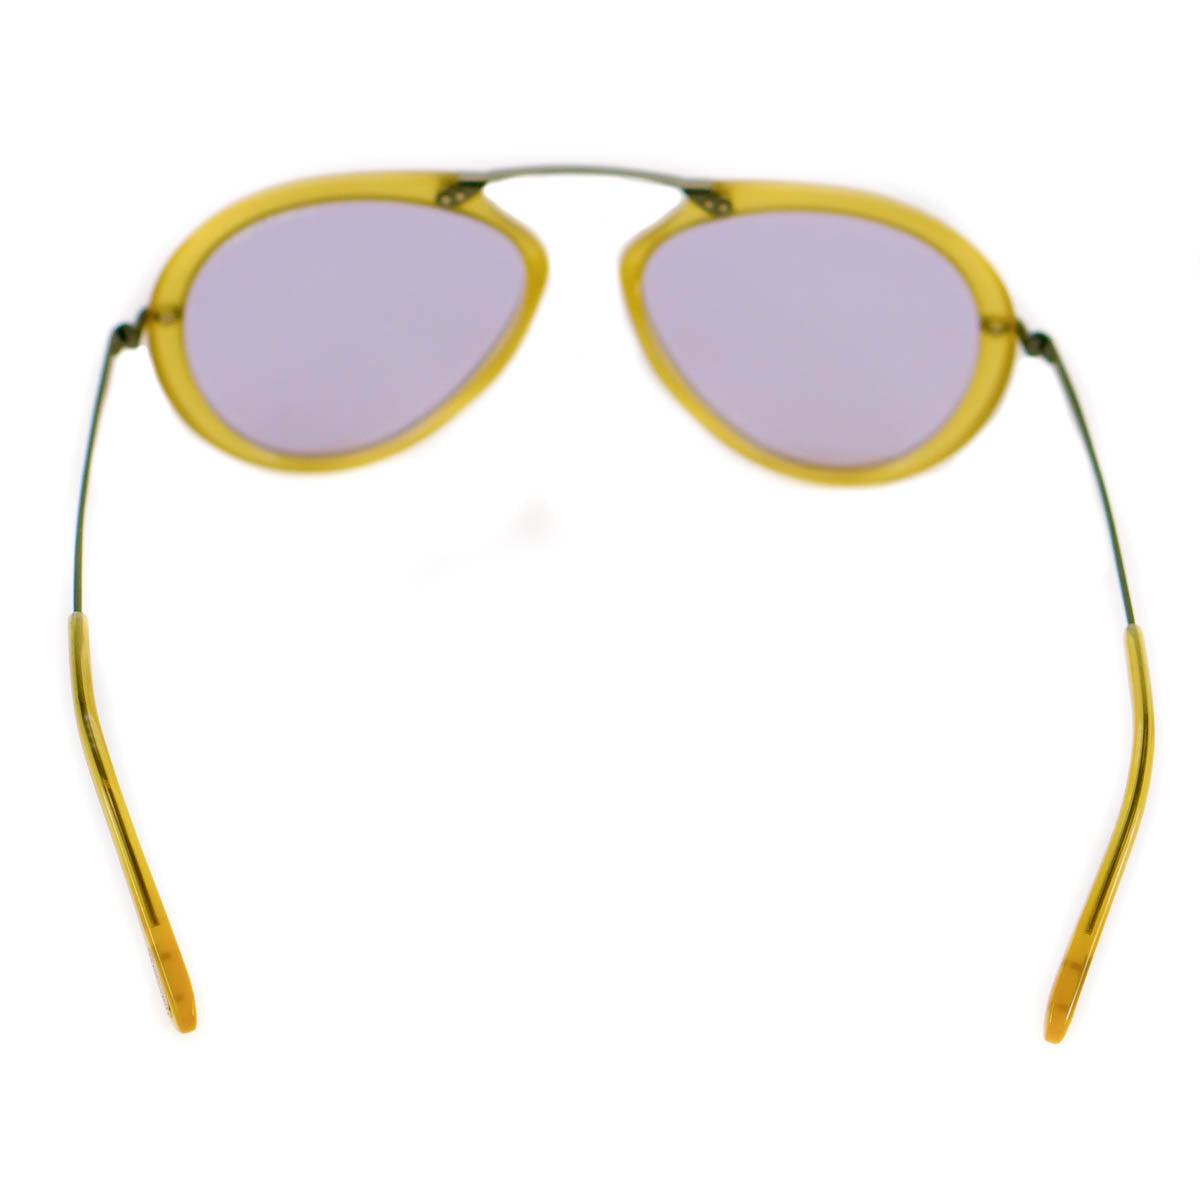 Tom Ford Sunglasses Mens Aaron Yellow & Violet TF473 39Y